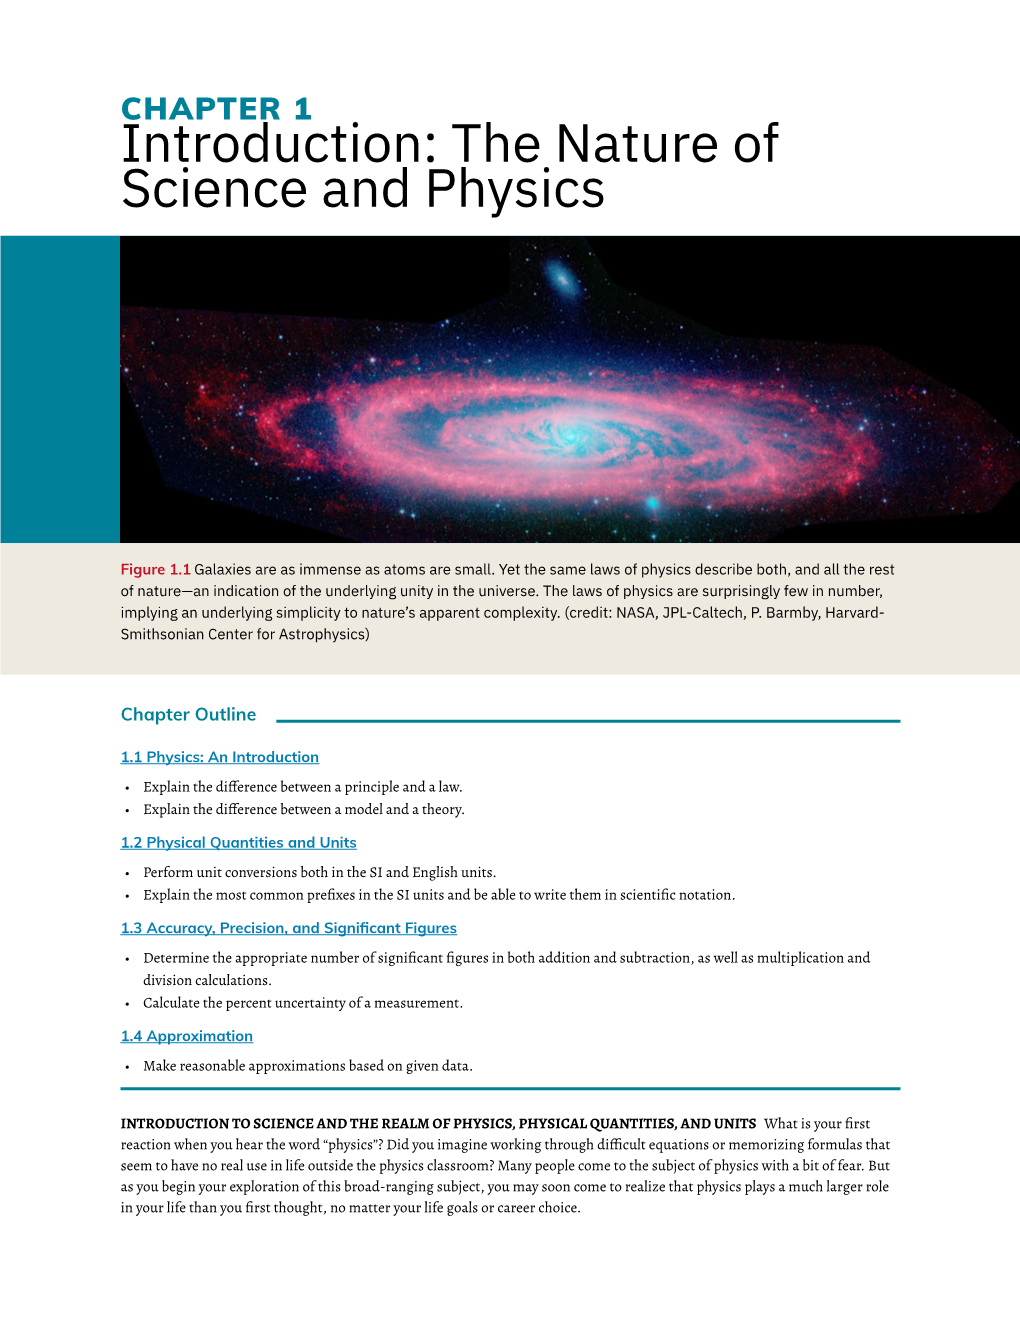 Download 01 Introduction -The Nature of Science and Physics.Pdf